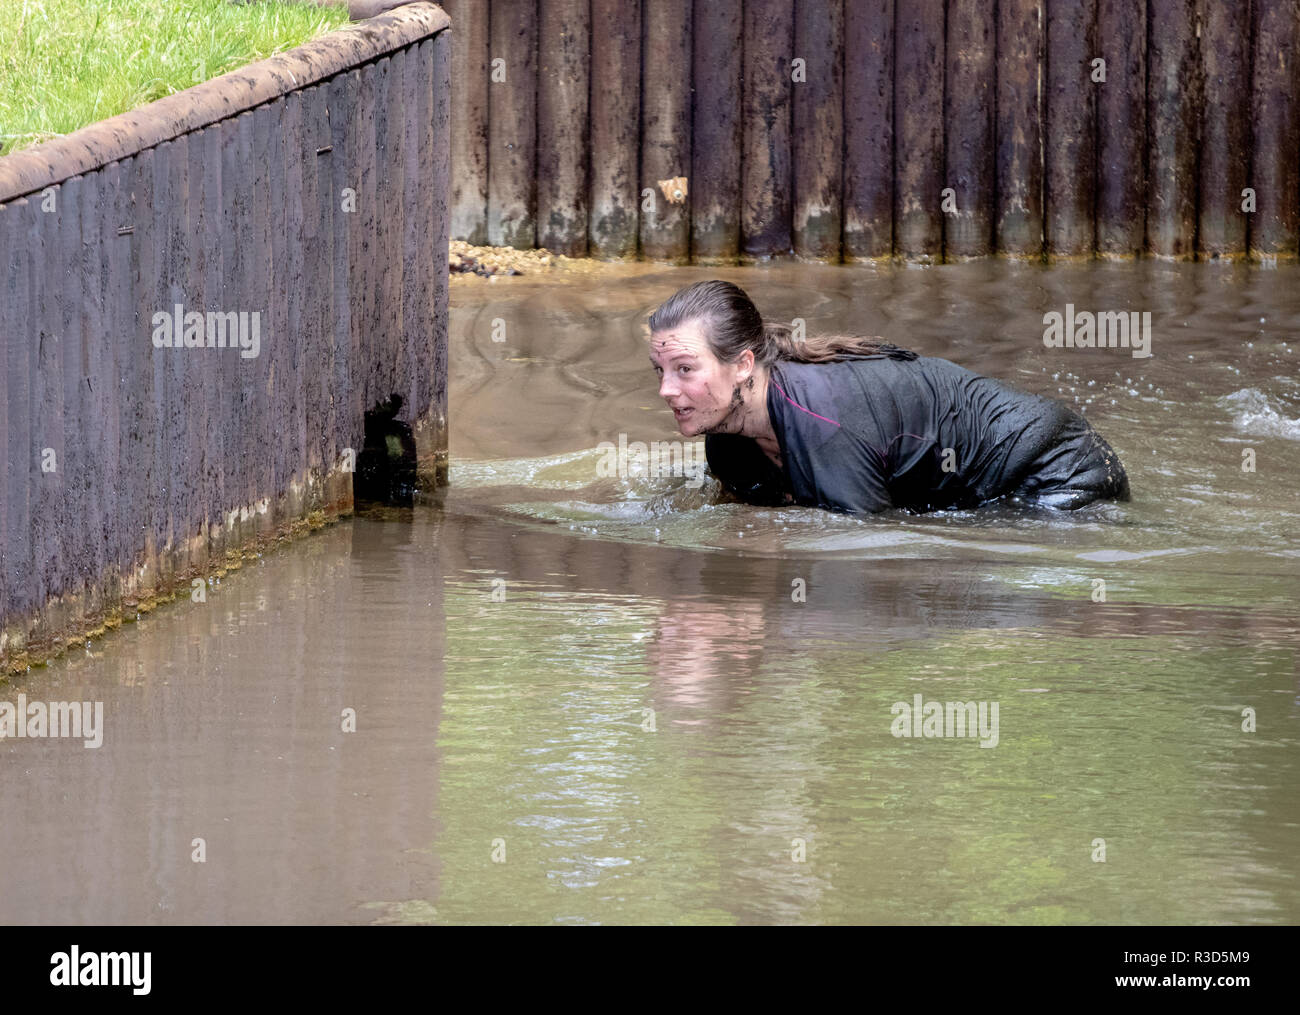 Rather soiled lady mud runner around a water crossing Stock Photo